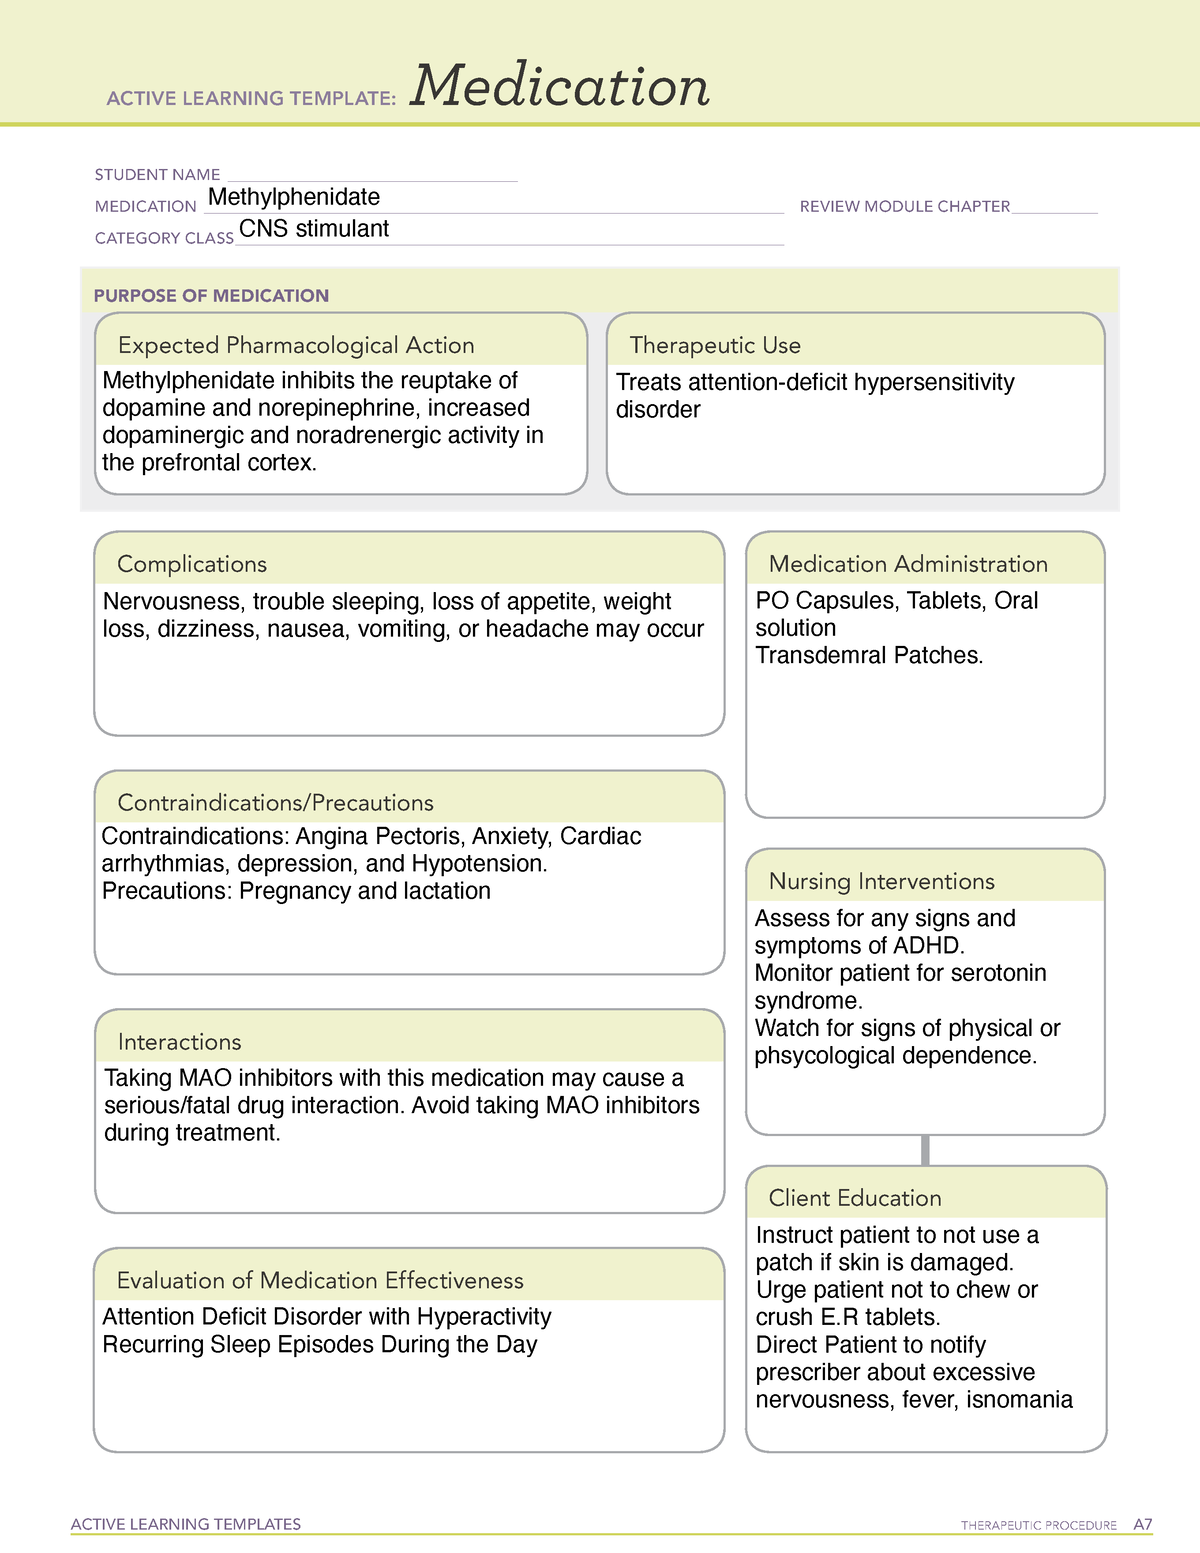 methylphenidate-learning-template-active-learning-templates